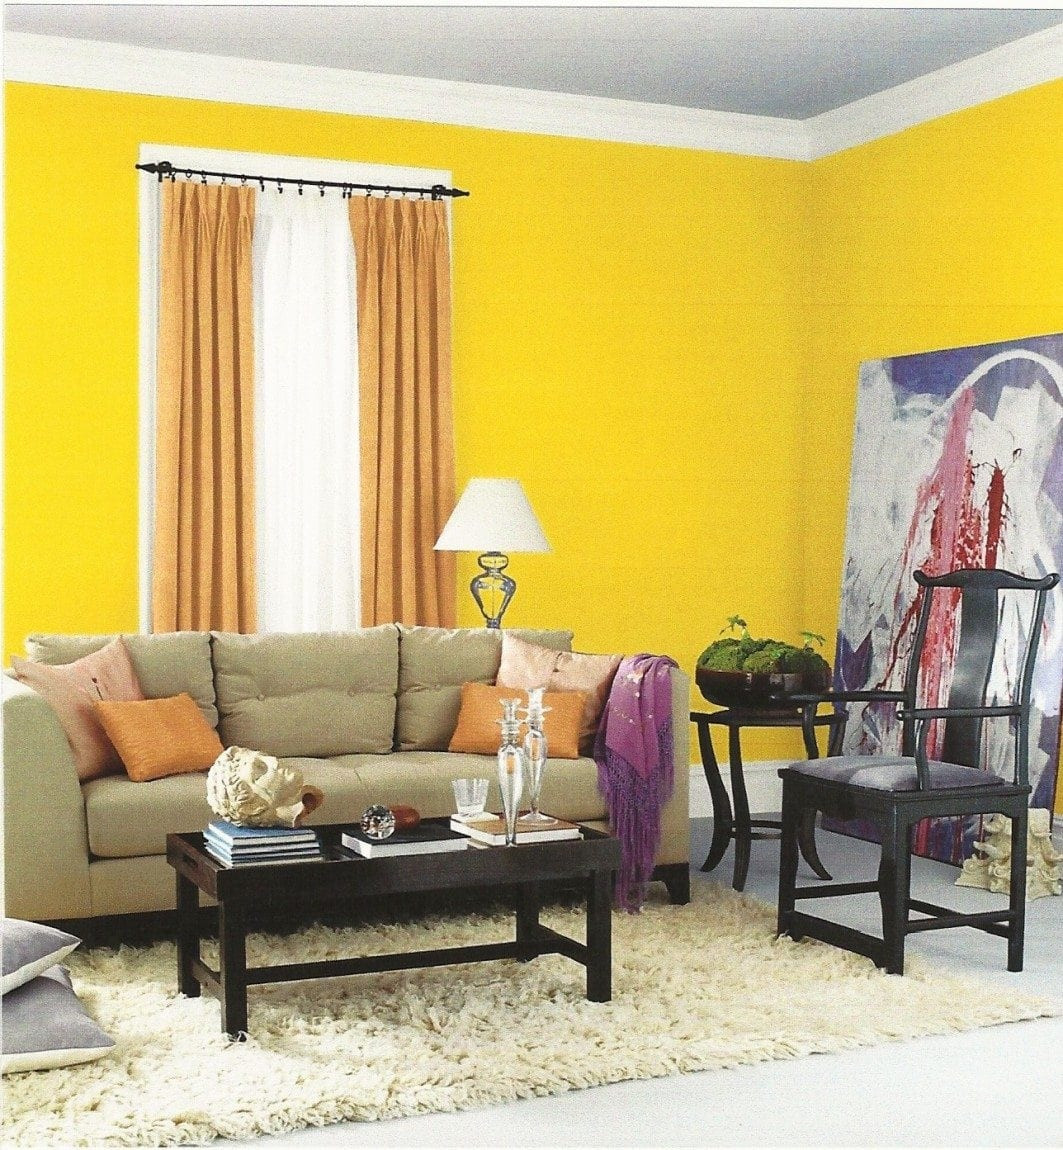 Yellow Paint For Living Room
 The Beginner’s Guide to Color Psychology for Interior